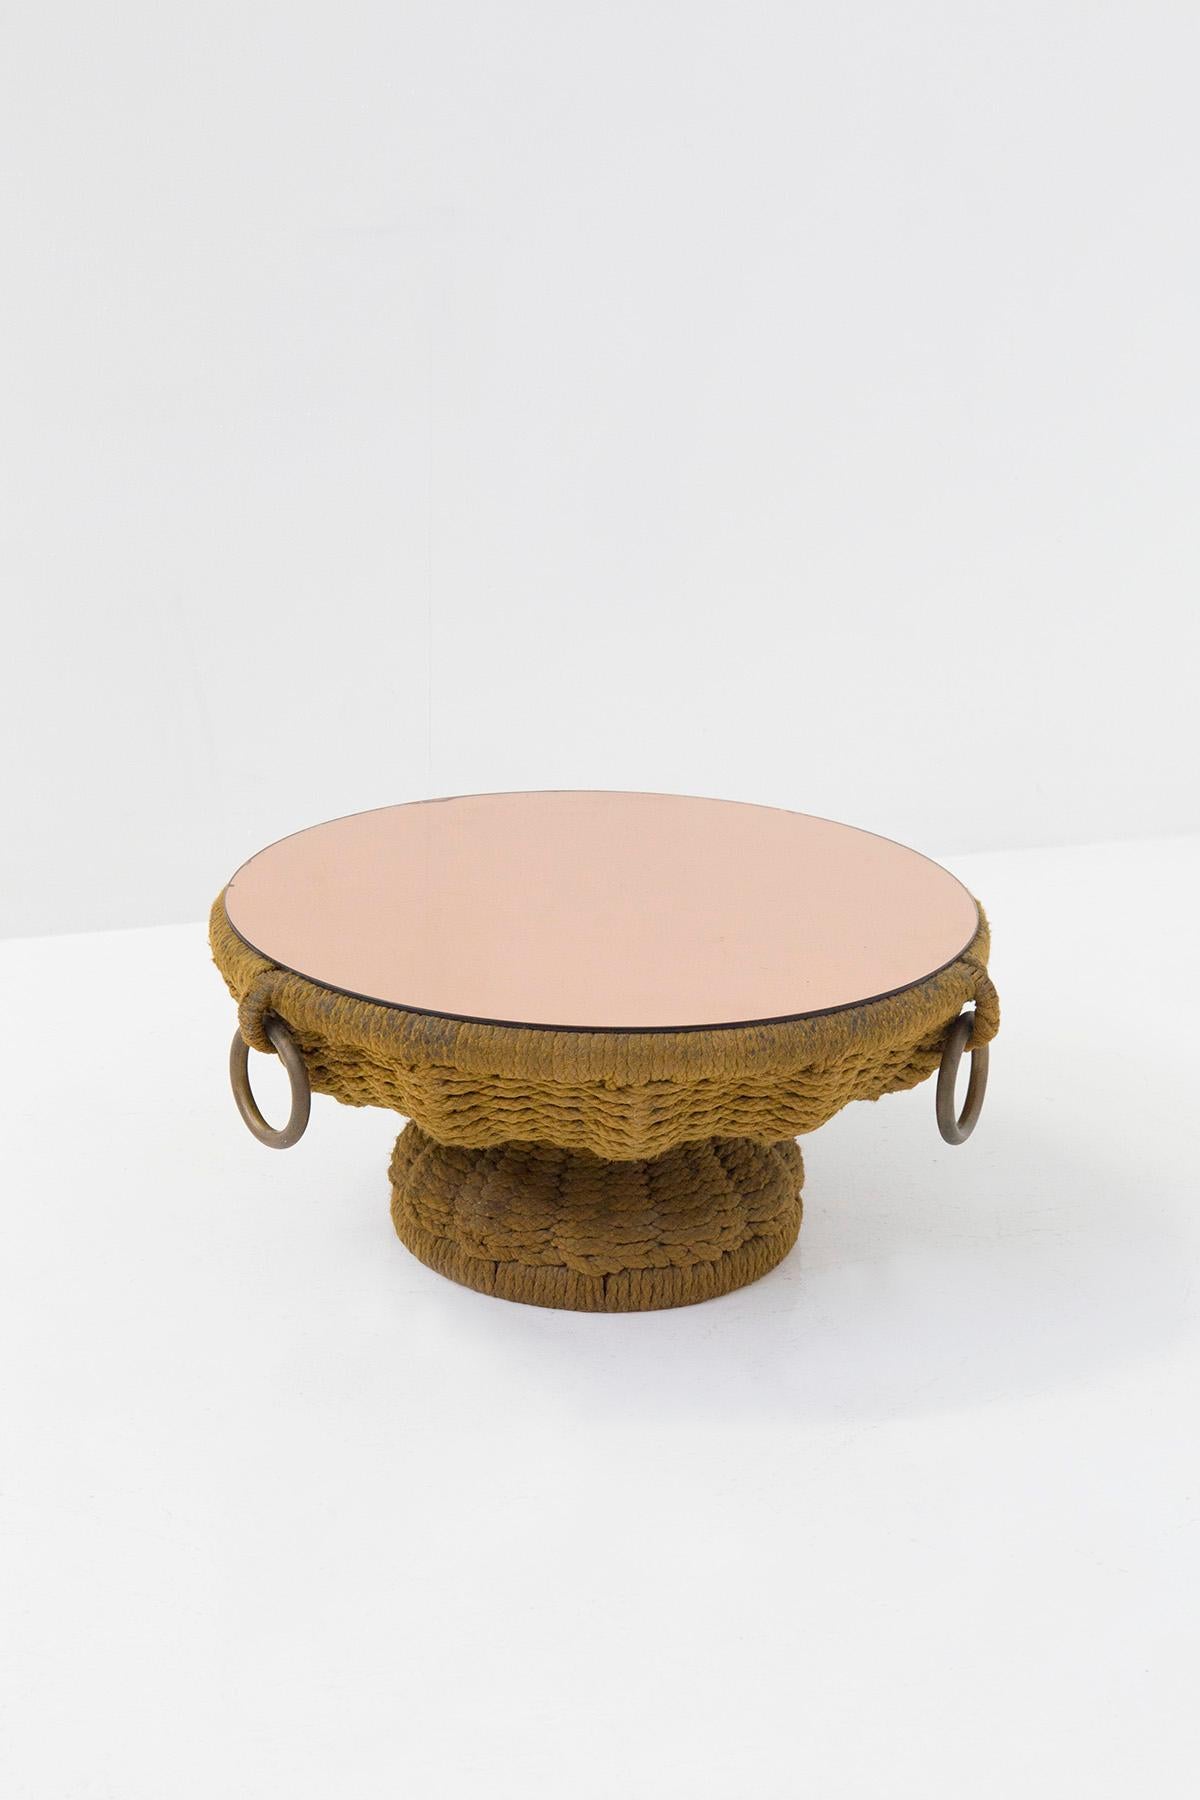 Magnificent coffee table by marzio Cecchi from the 1970s. The coffee table is a magnificent example of Italian craftsmanship on working with rope. In fact, the coffee table features a structure with a very dense weave made with rope. An elegant